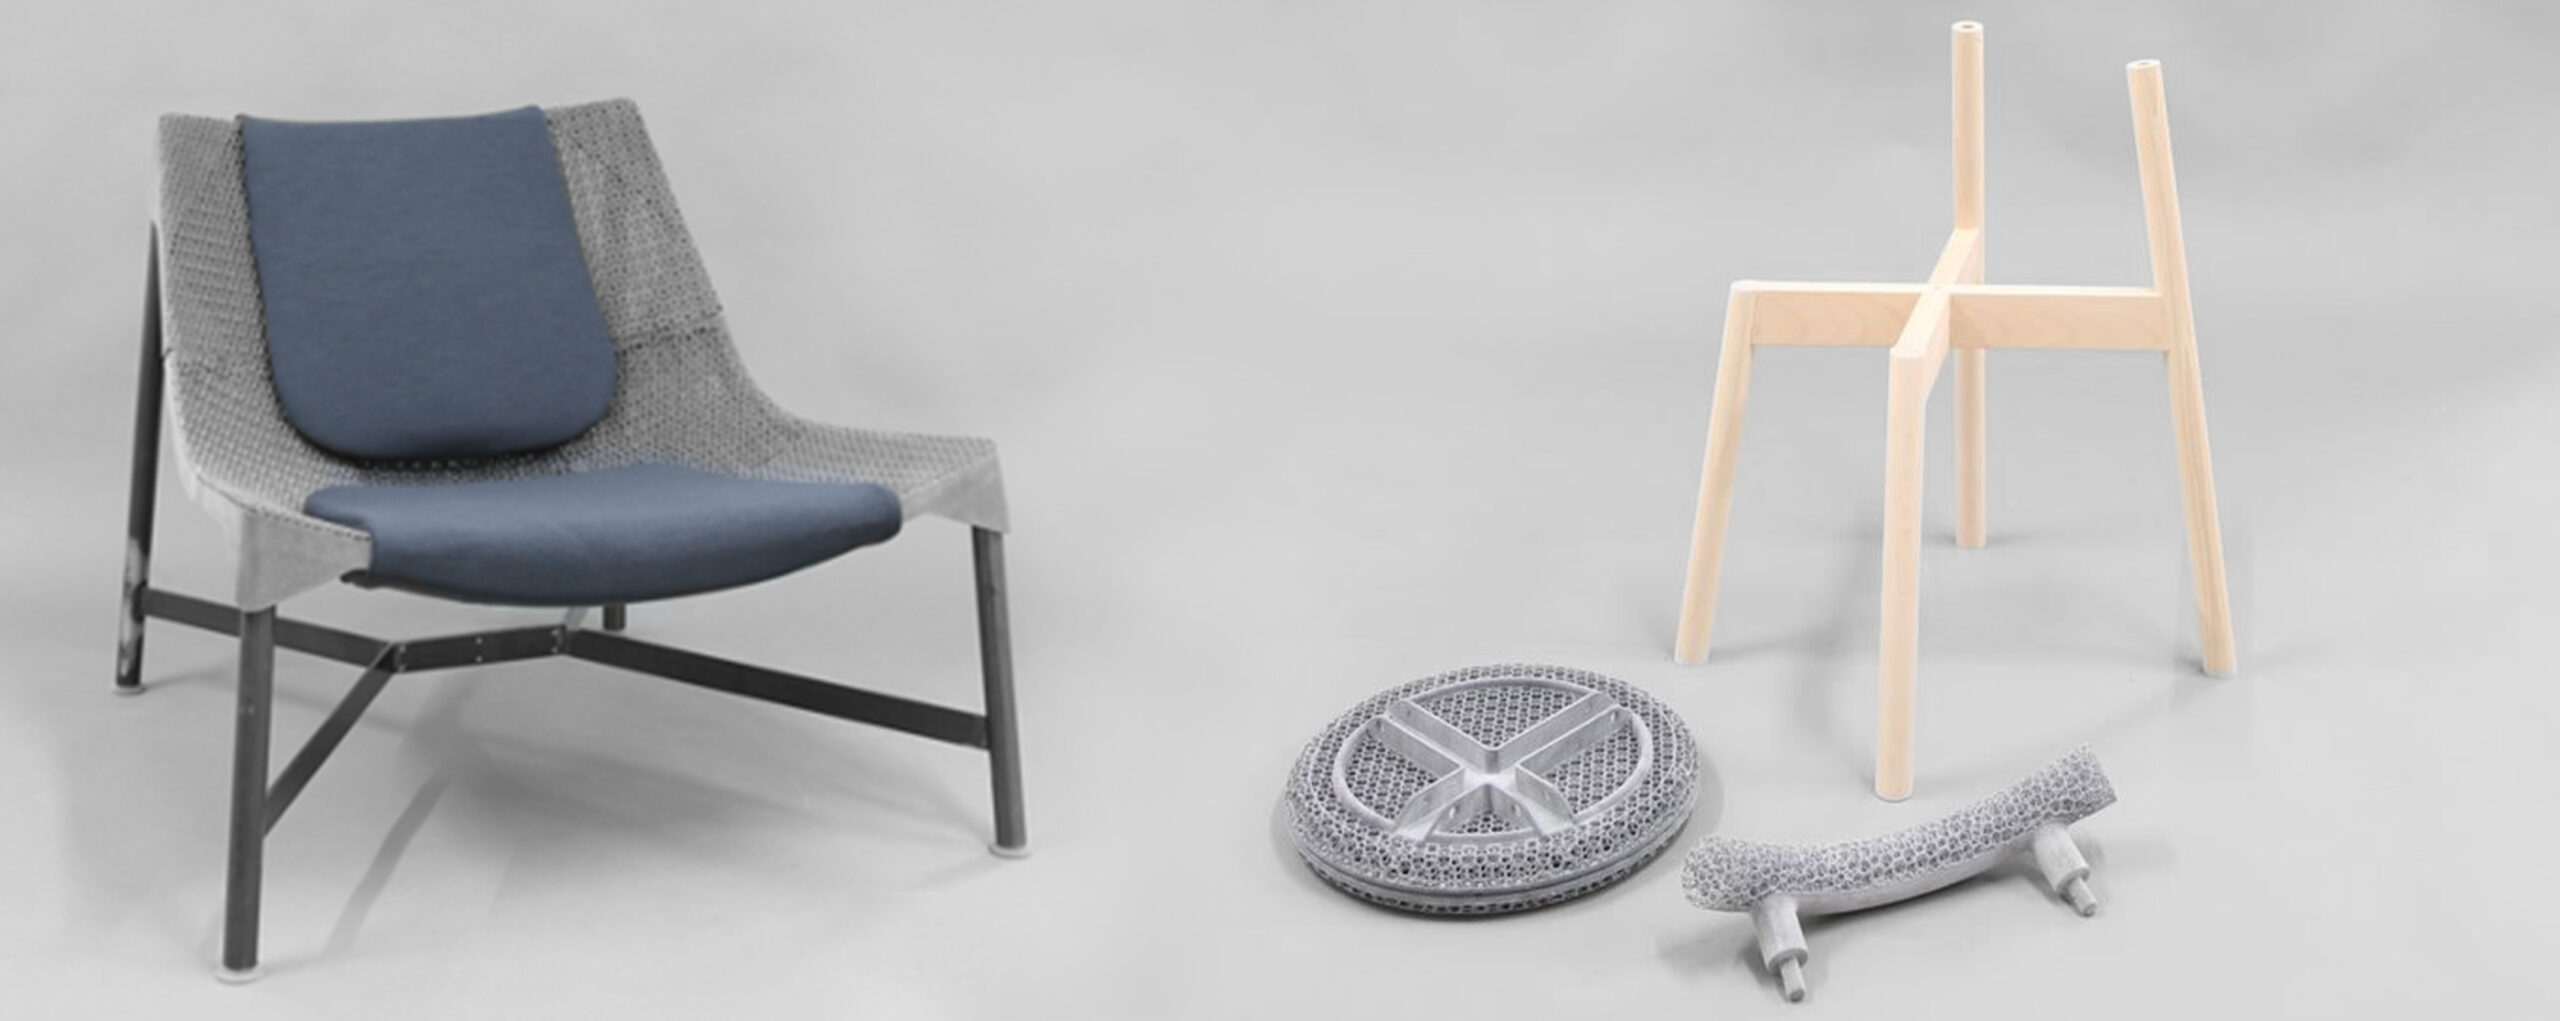 A chair with a metal substructure and a wide seat made of a gray lattice structure with dark gray seat cushions in the middle, next to it a wooden chair and a 3D-printed seat and backrest in individual parts lying on the floor.